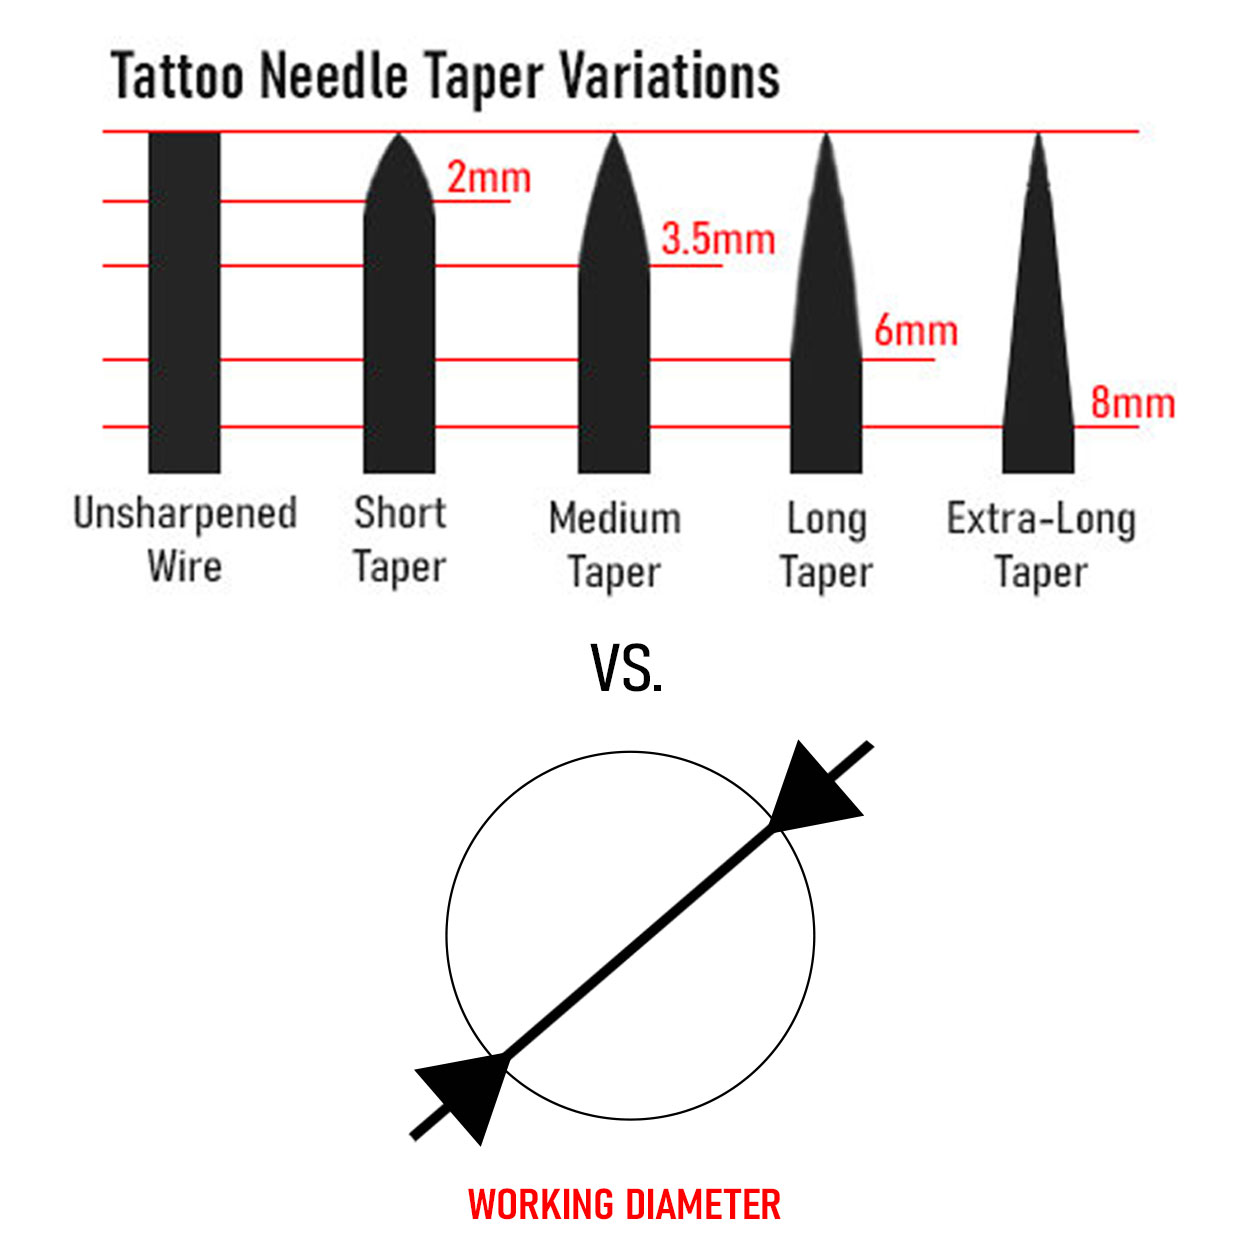 Permanent Makeup Needle Guide – A Look at PMU Cartridges – Ultimate Tattoo  Supply